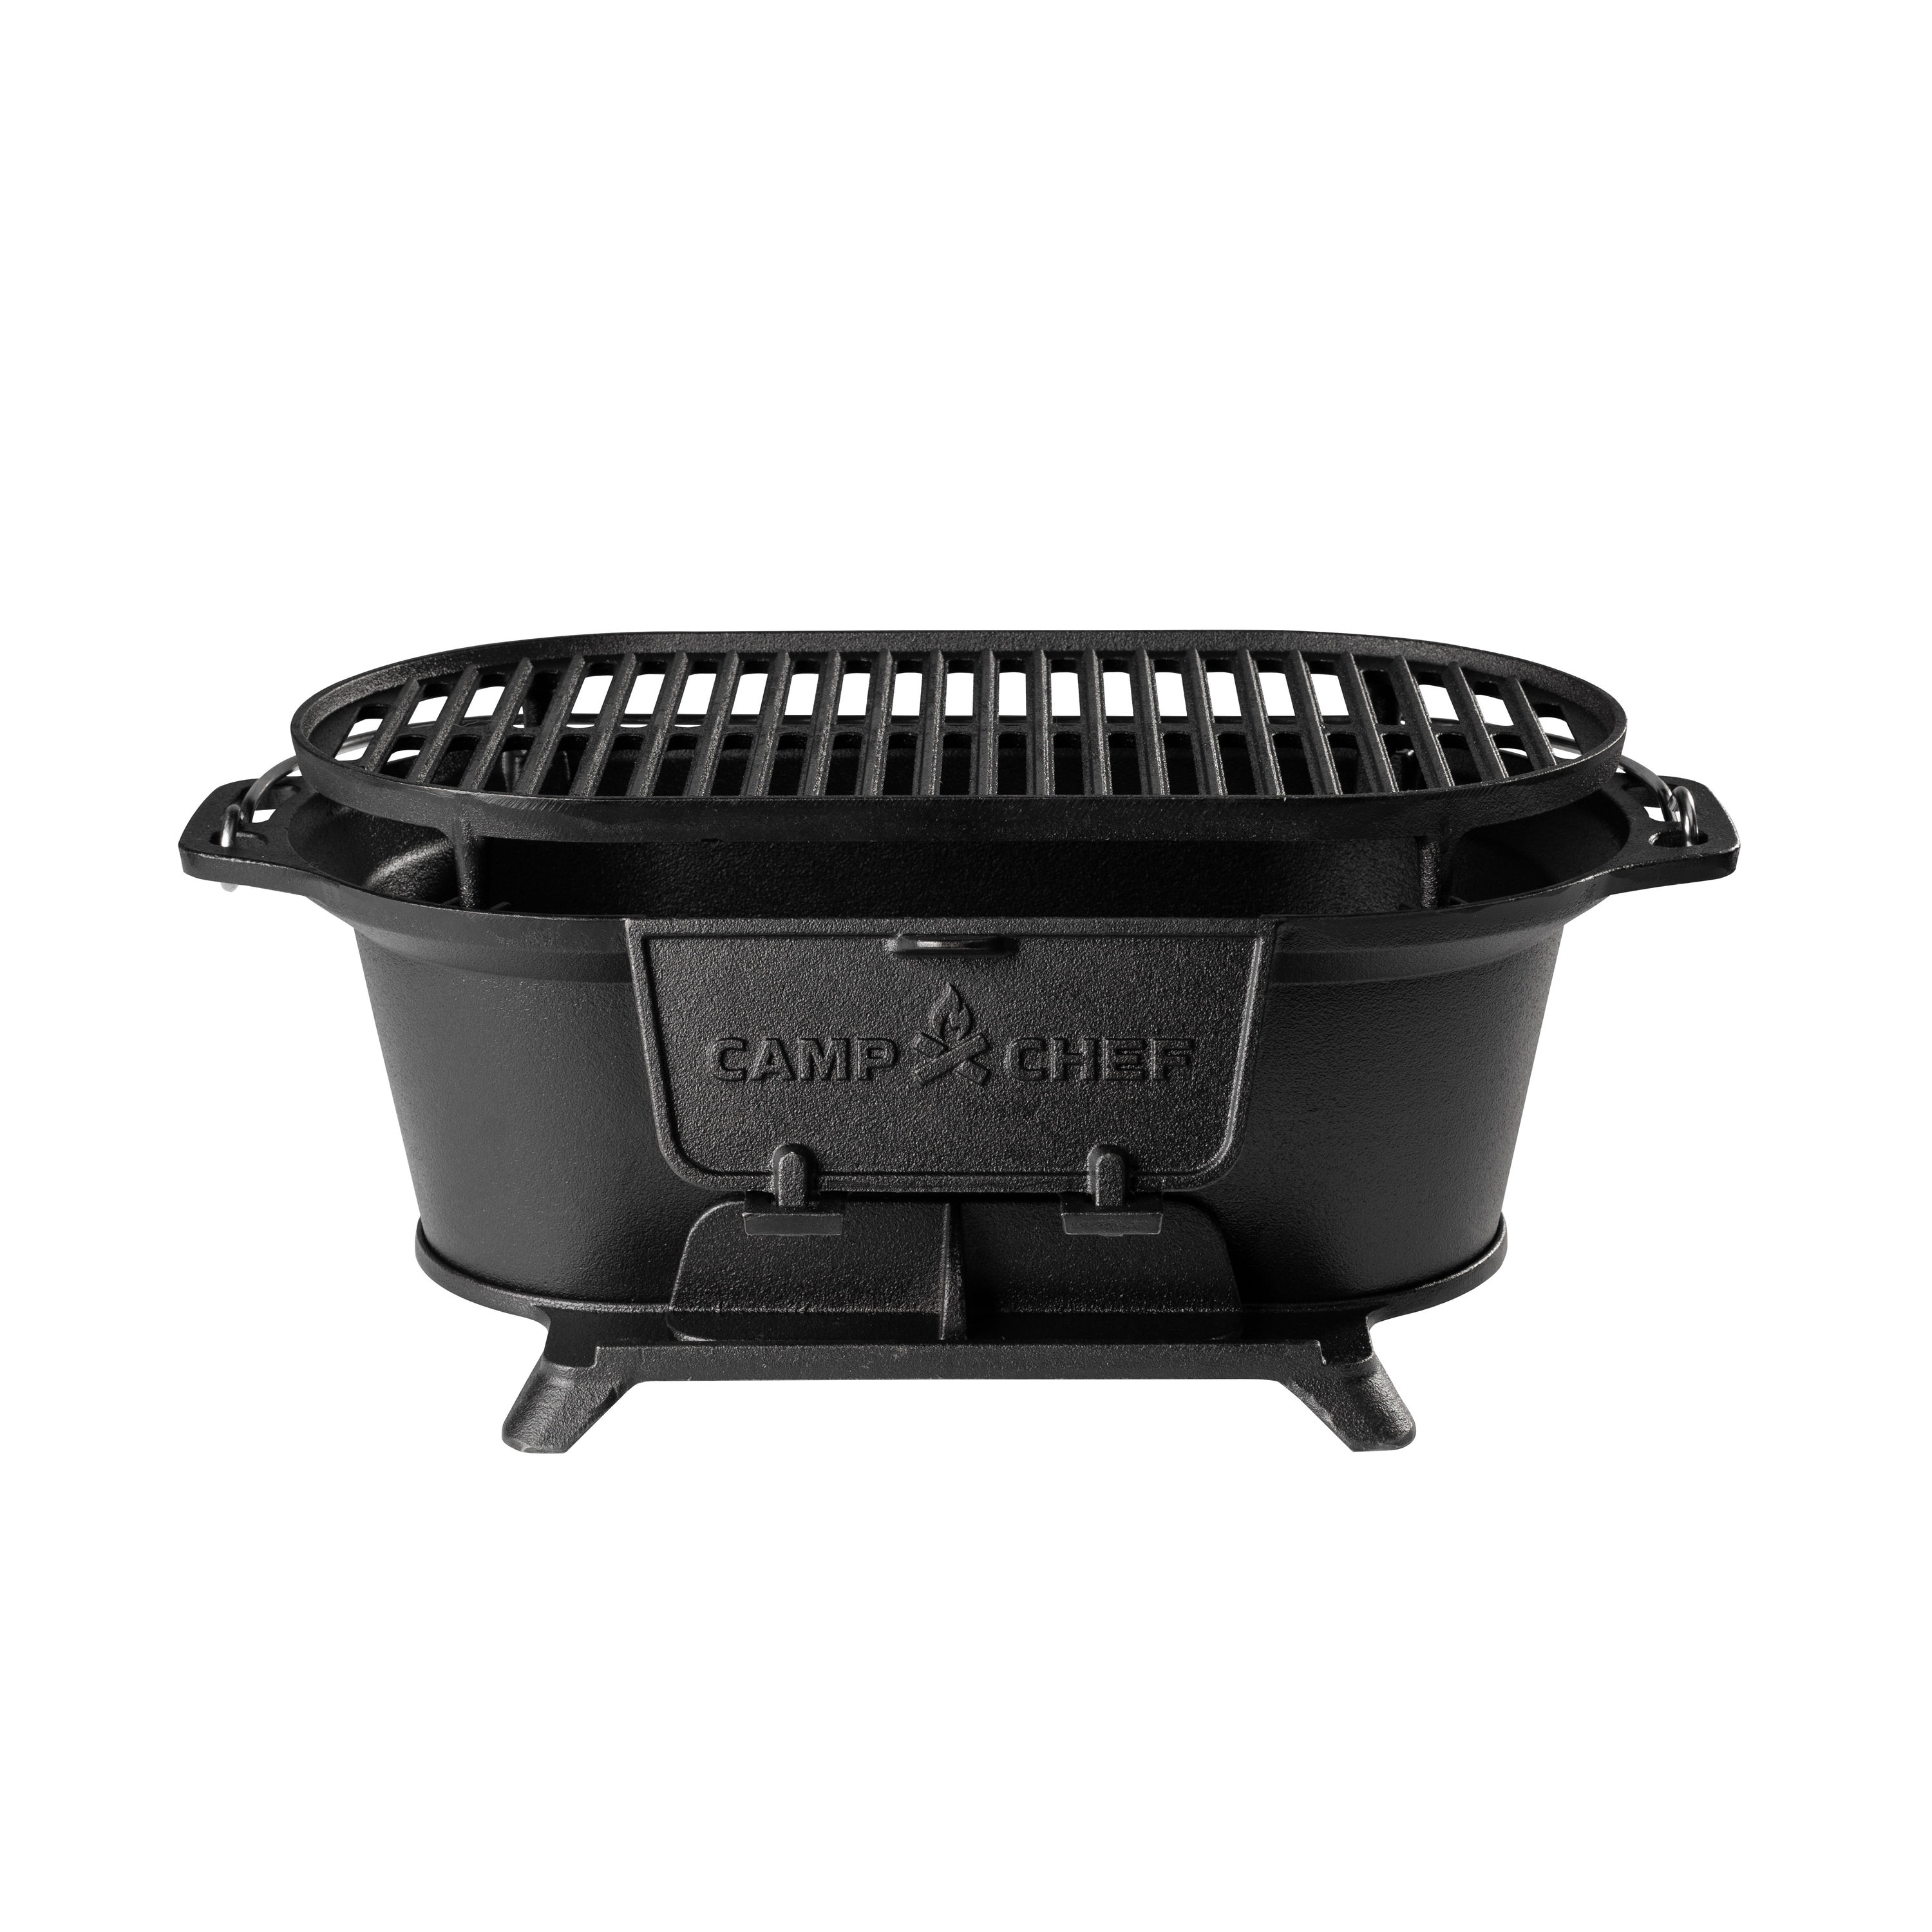 Cast Iron Charcoal Grill and More | Camp Chef